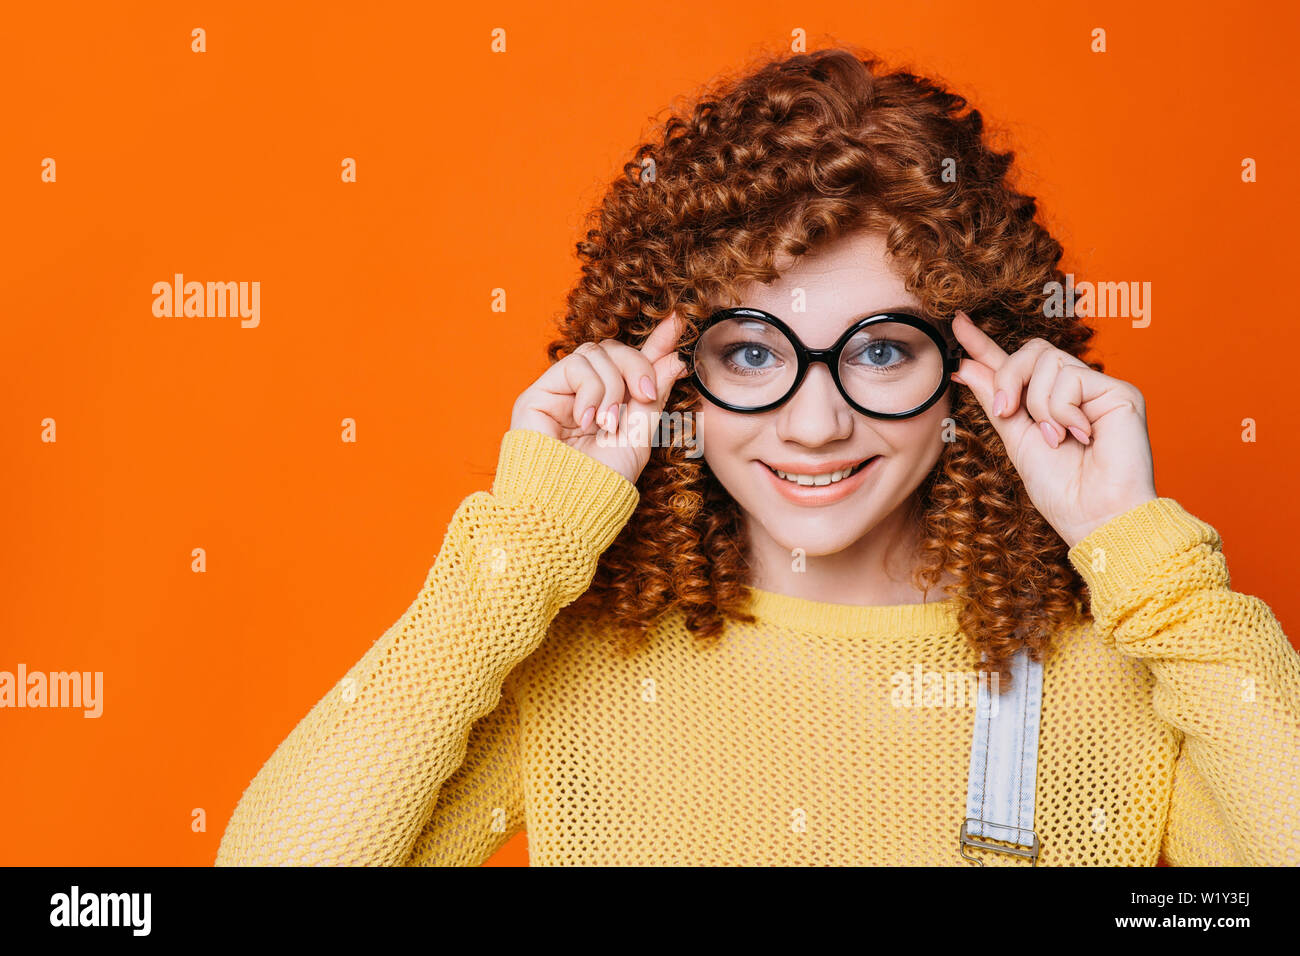 curly- haired woman ajusting her eyeglasses on orange background. tennage girl with stylish hipster glasses Stock Photo